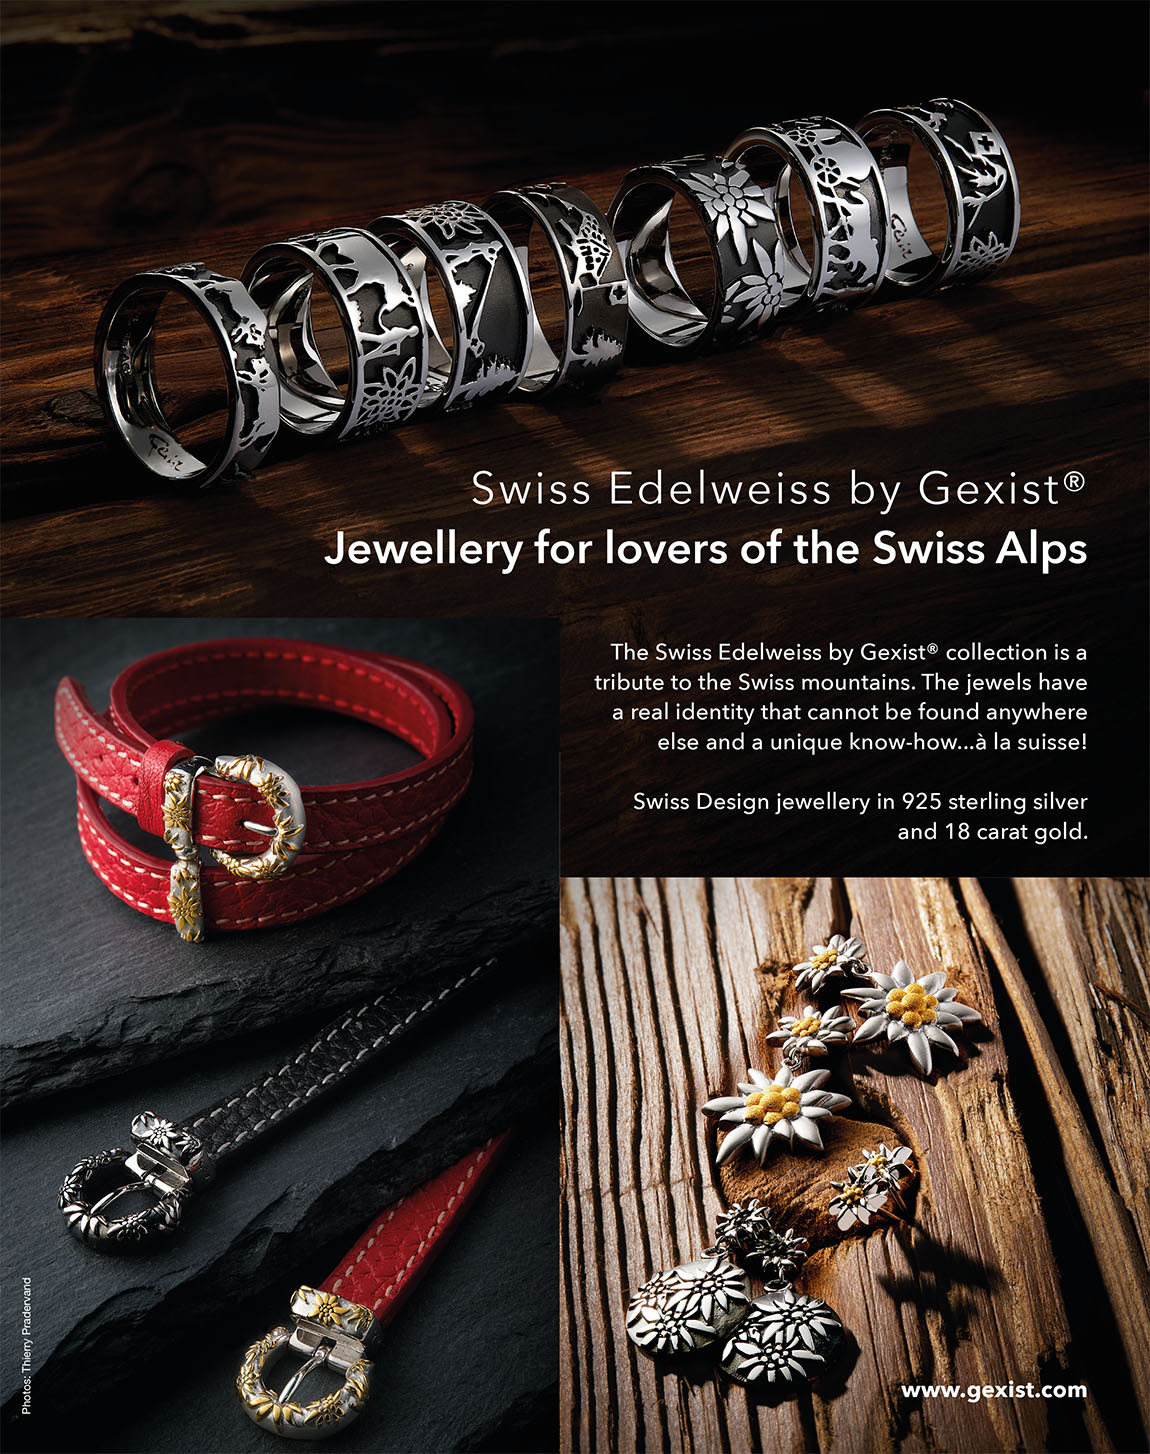 Gexist: AN HOMAGE TO SWISS TRADITION